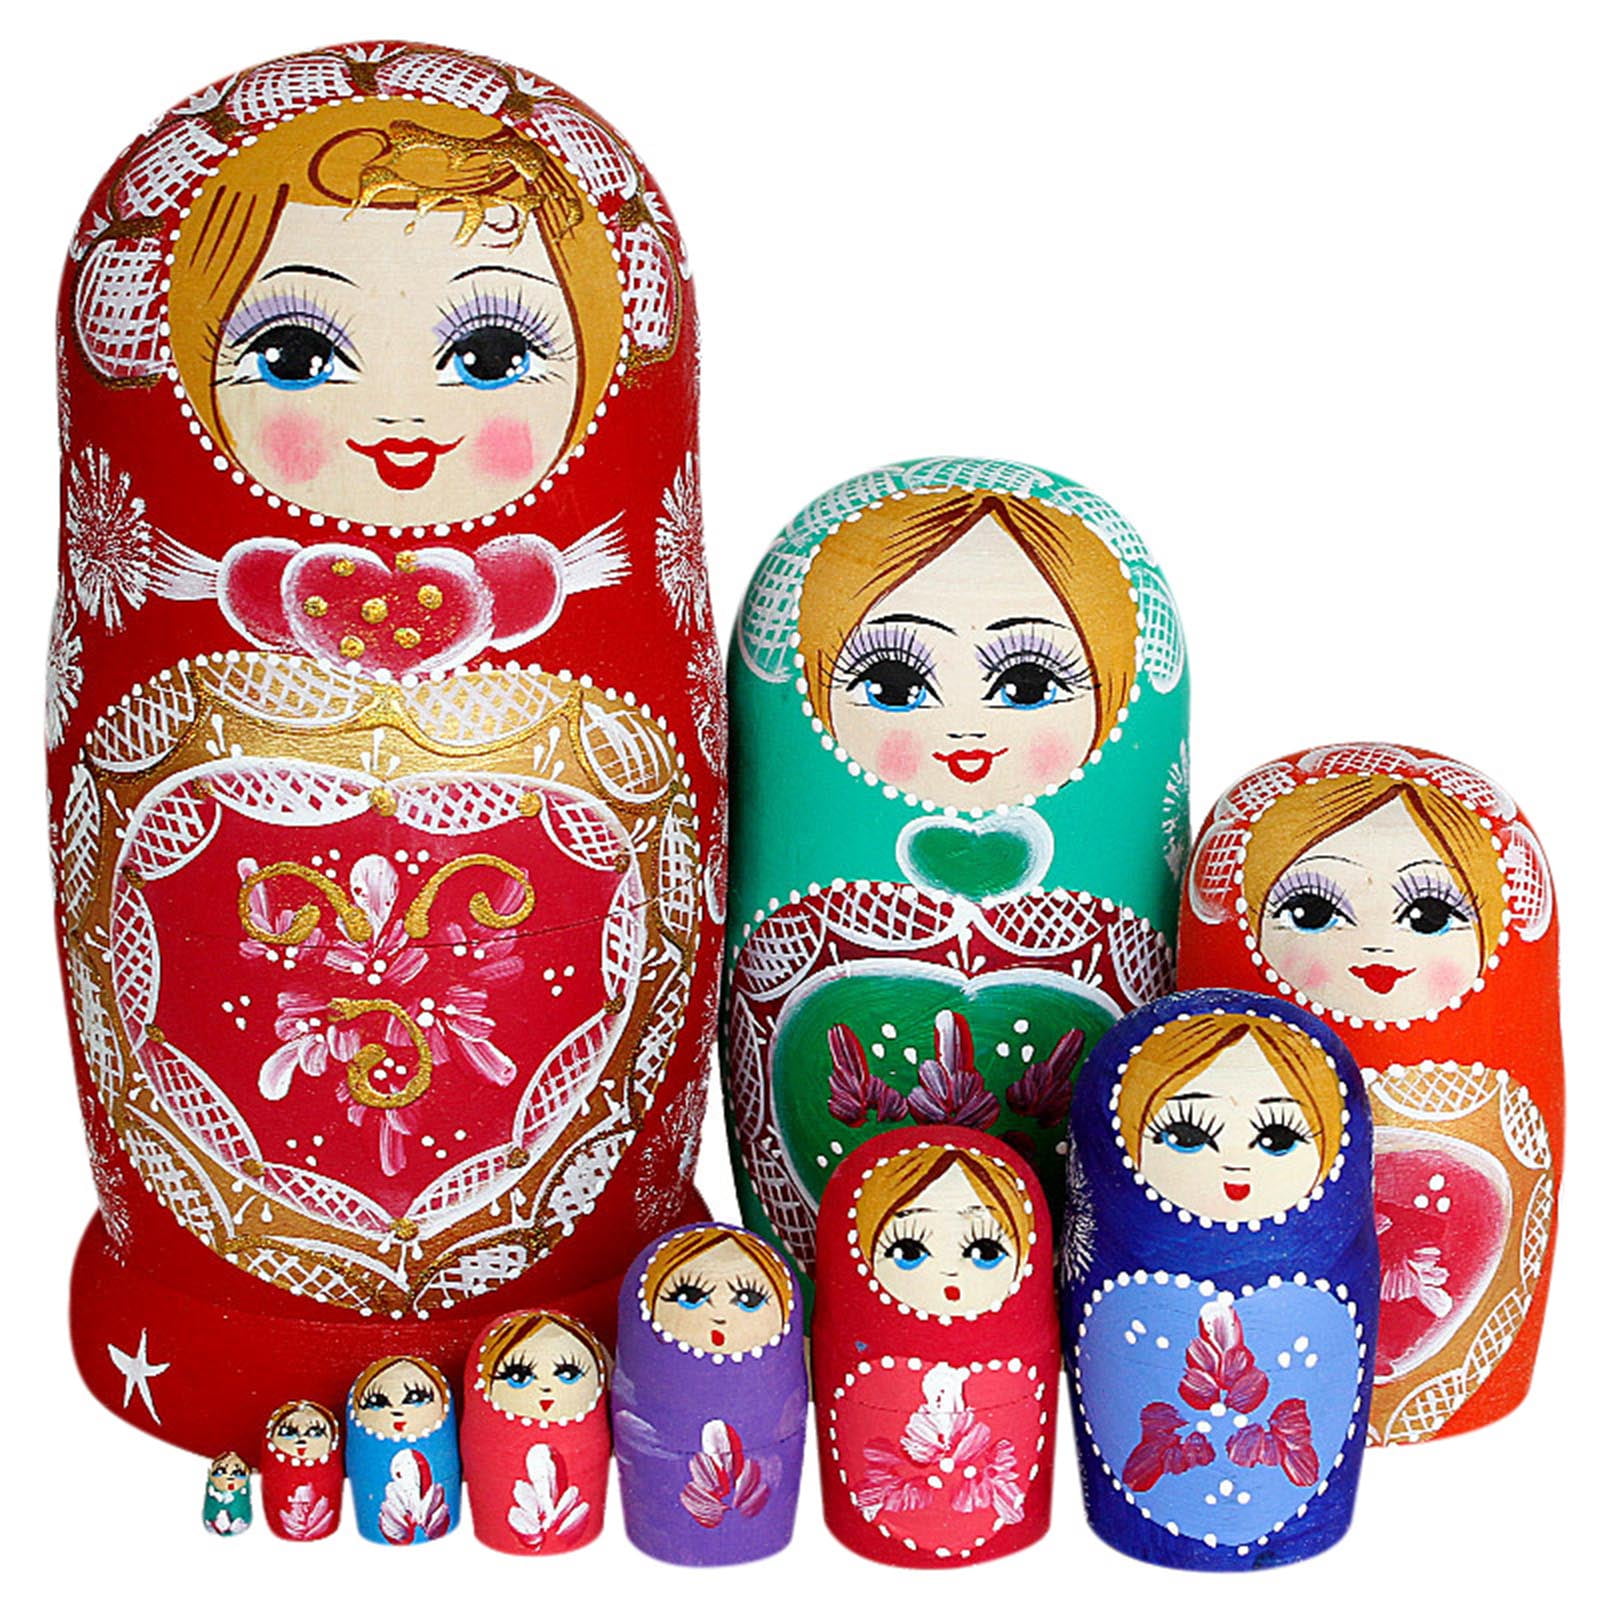 Authentic Russian Hand Painted Handmade Red Gold Nesting Doll set of 5 pcs 